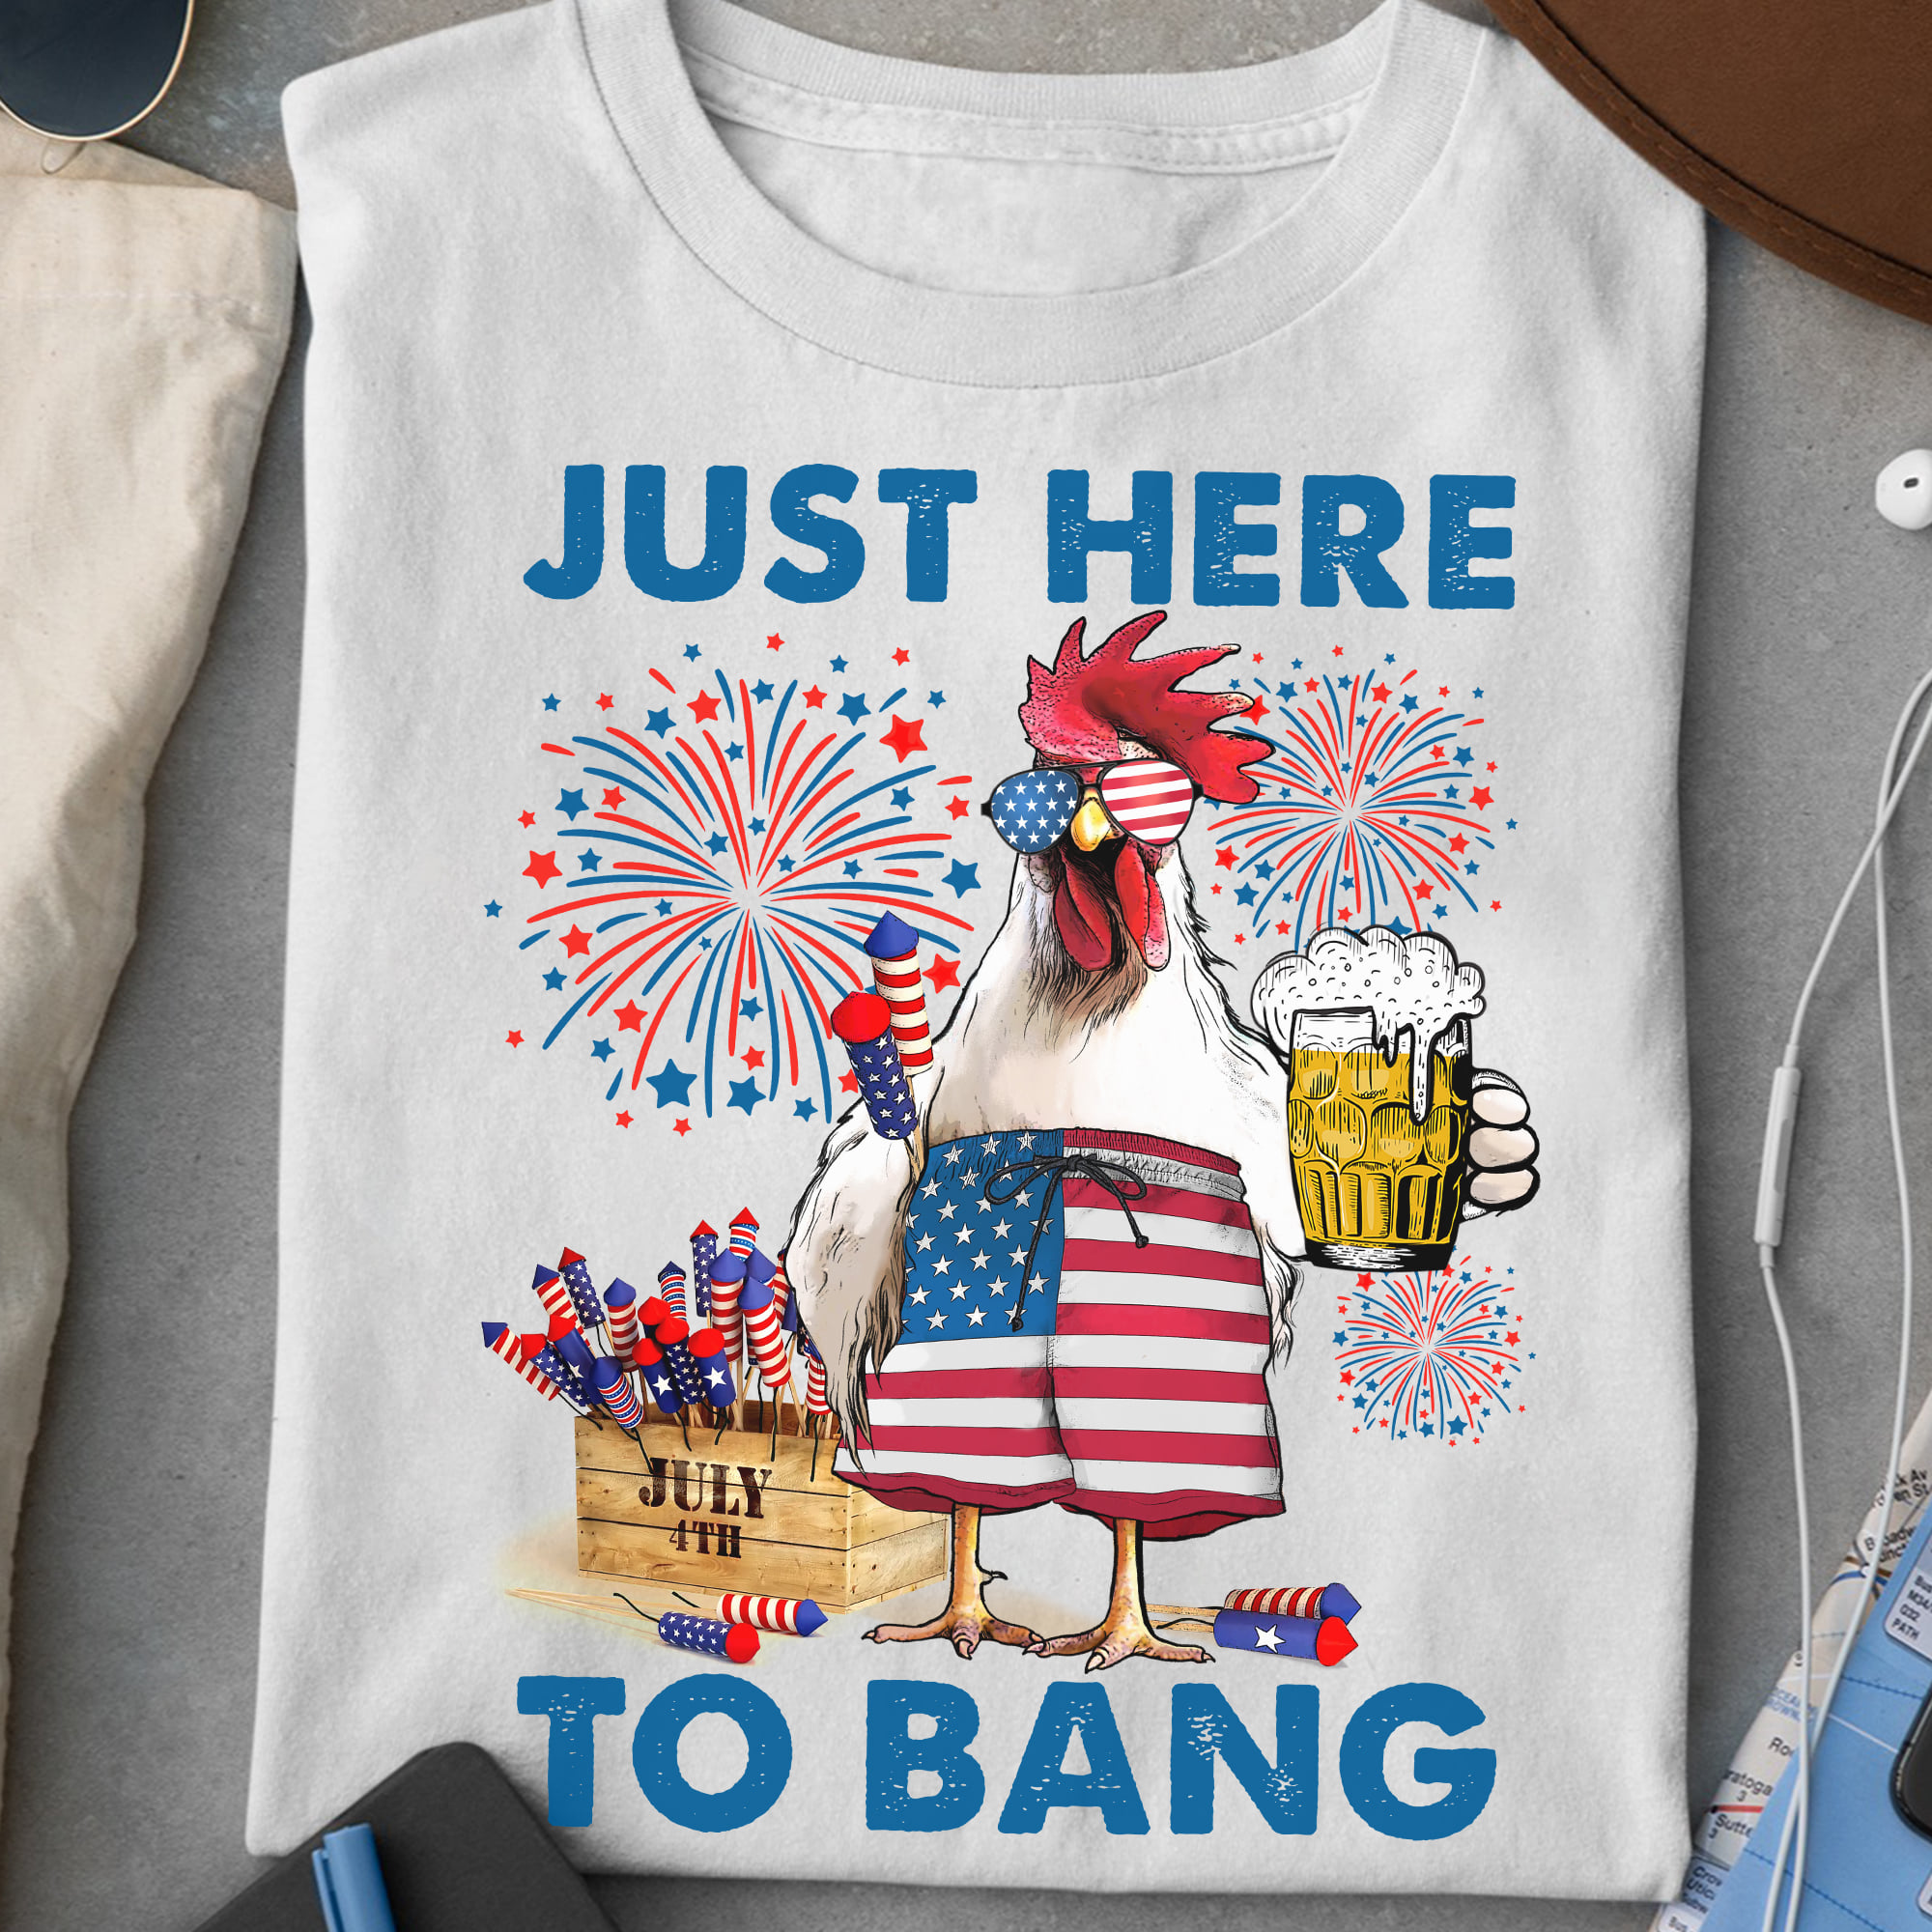 Just here to bang - Chicken and beer, independence day